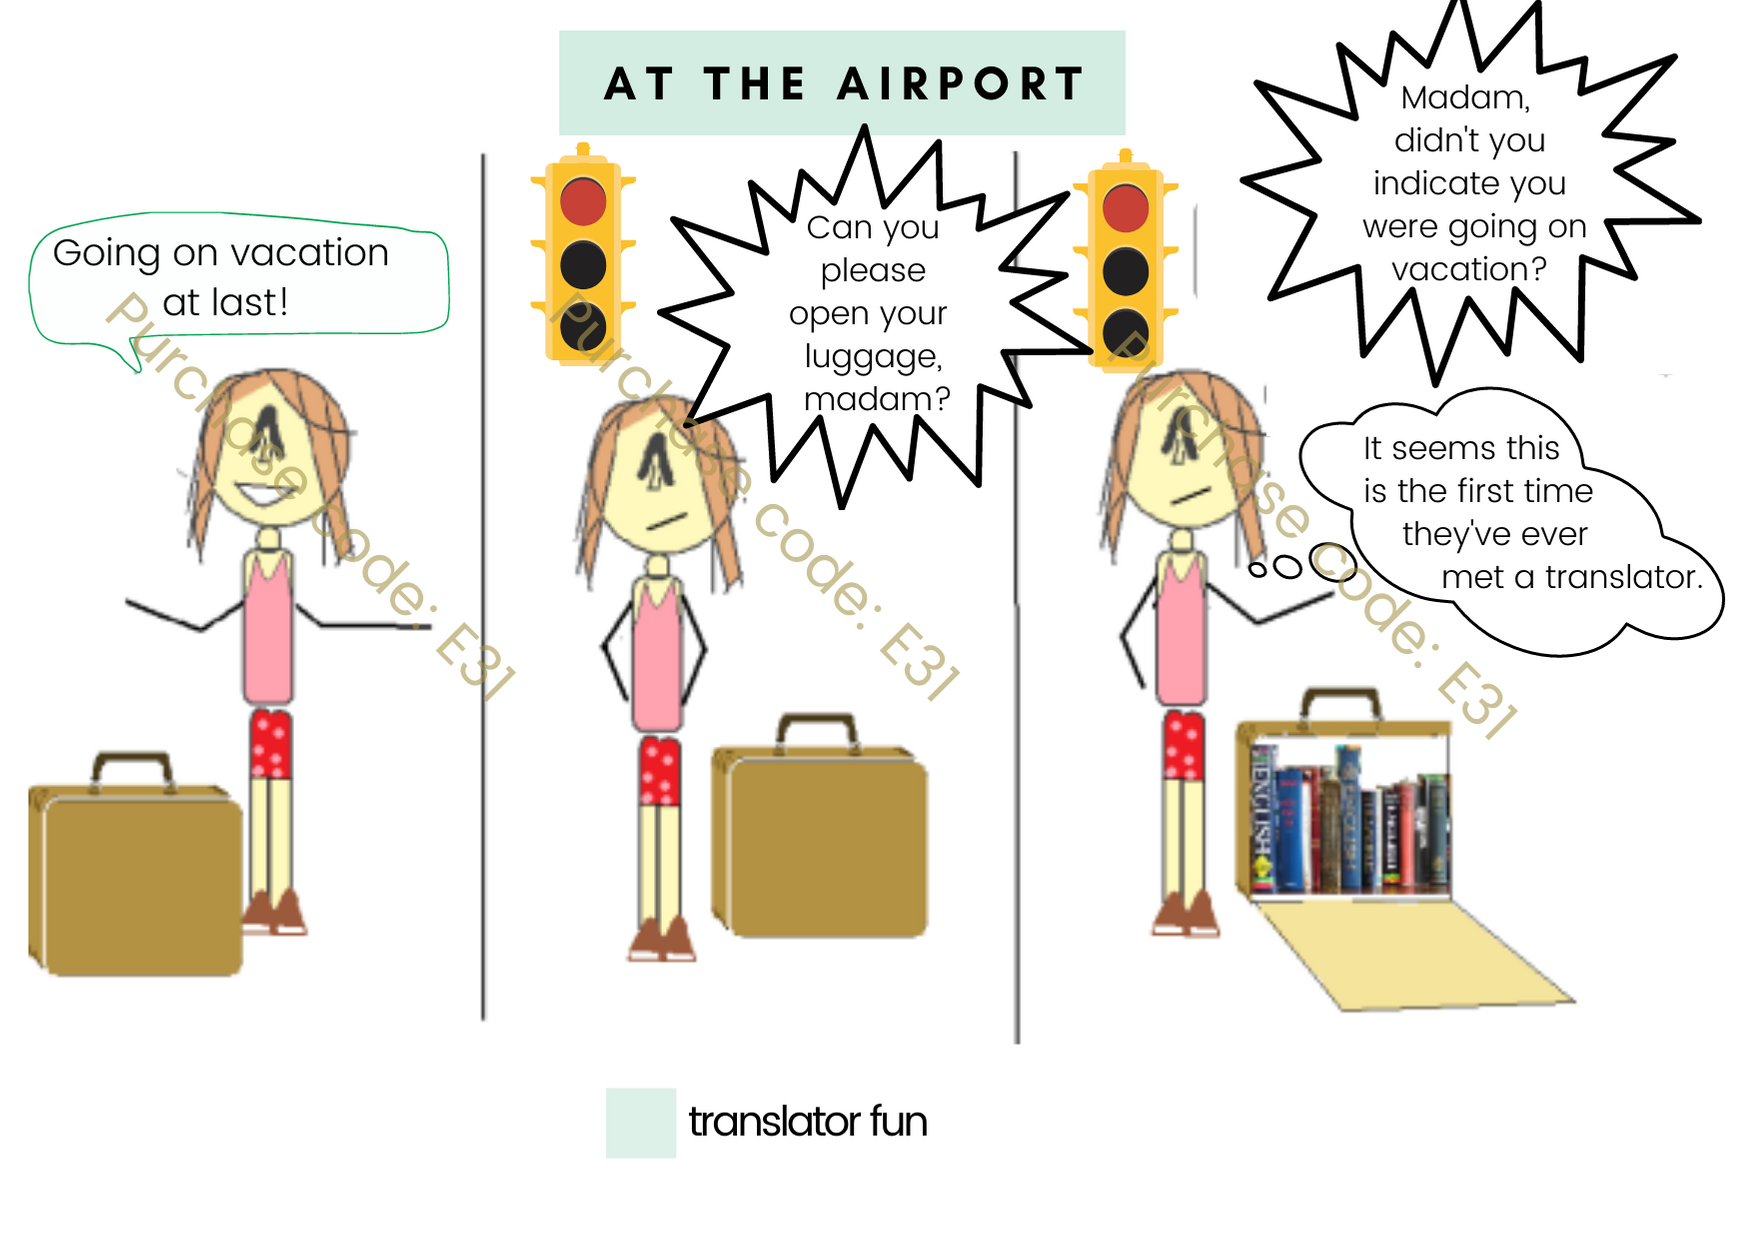 A translator going on vacation